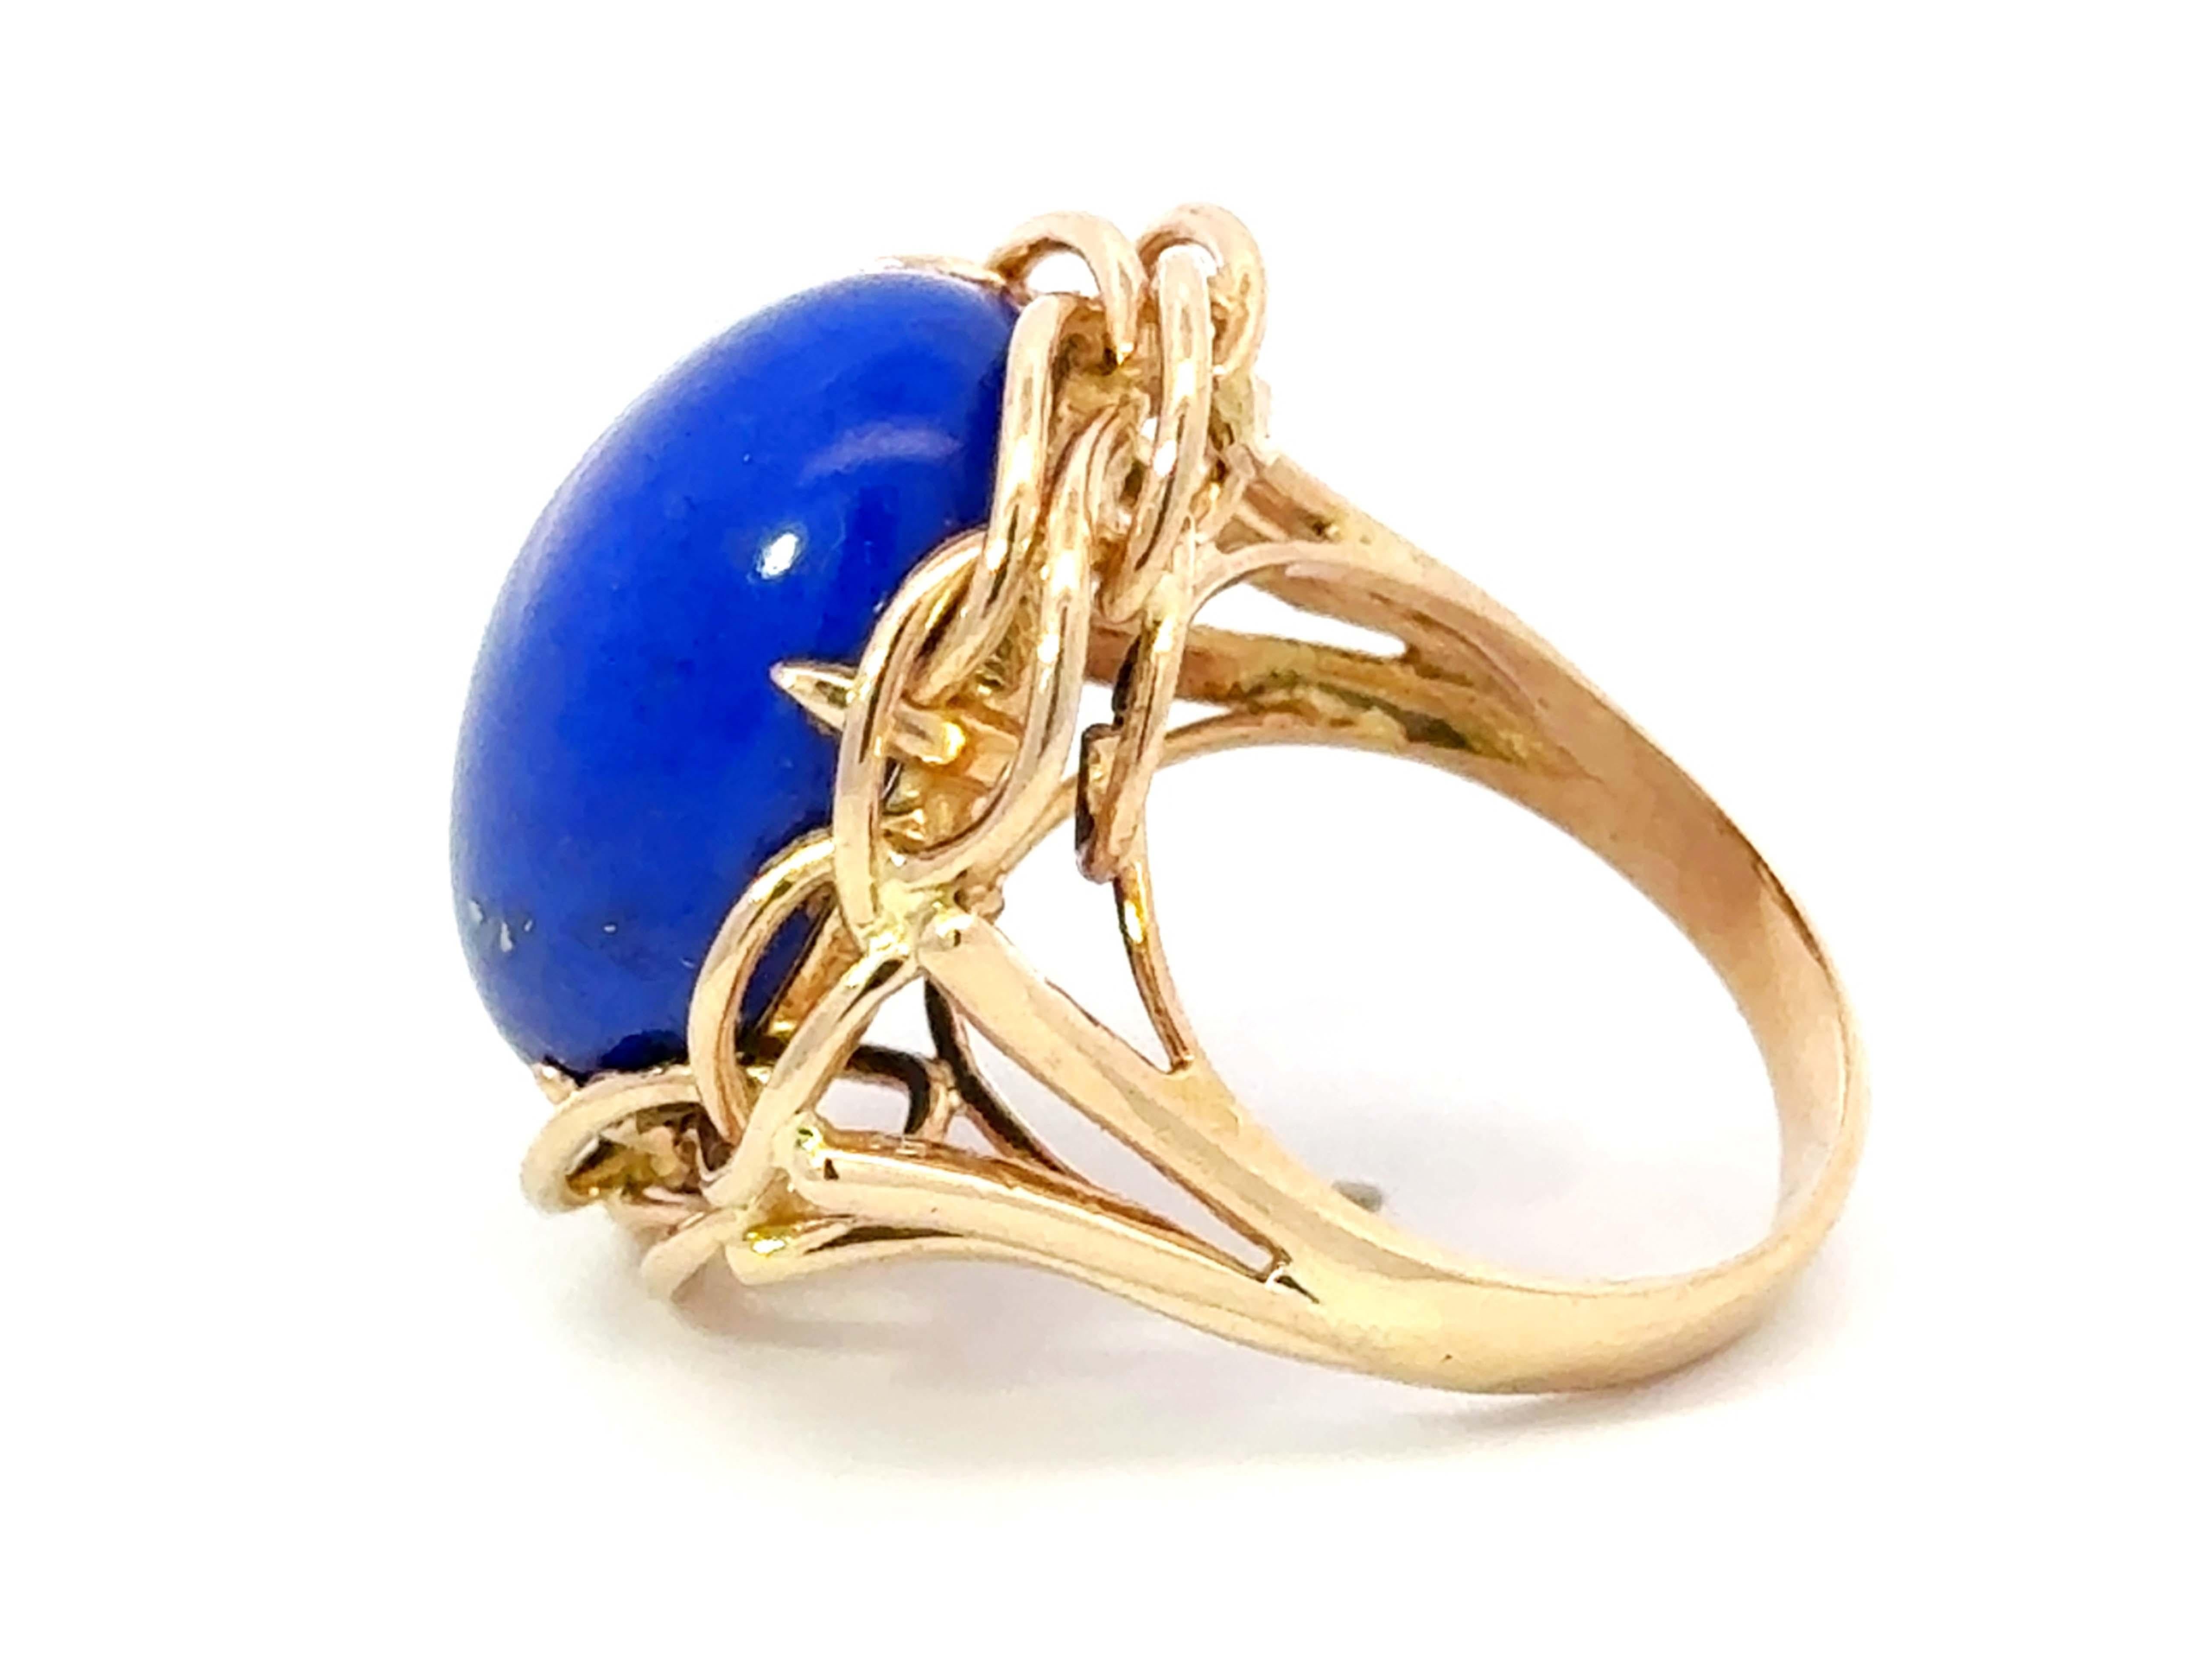 Women's Large Oval Lapis Lazuli Cocktail Ring 14k Yellow Gold For Sale